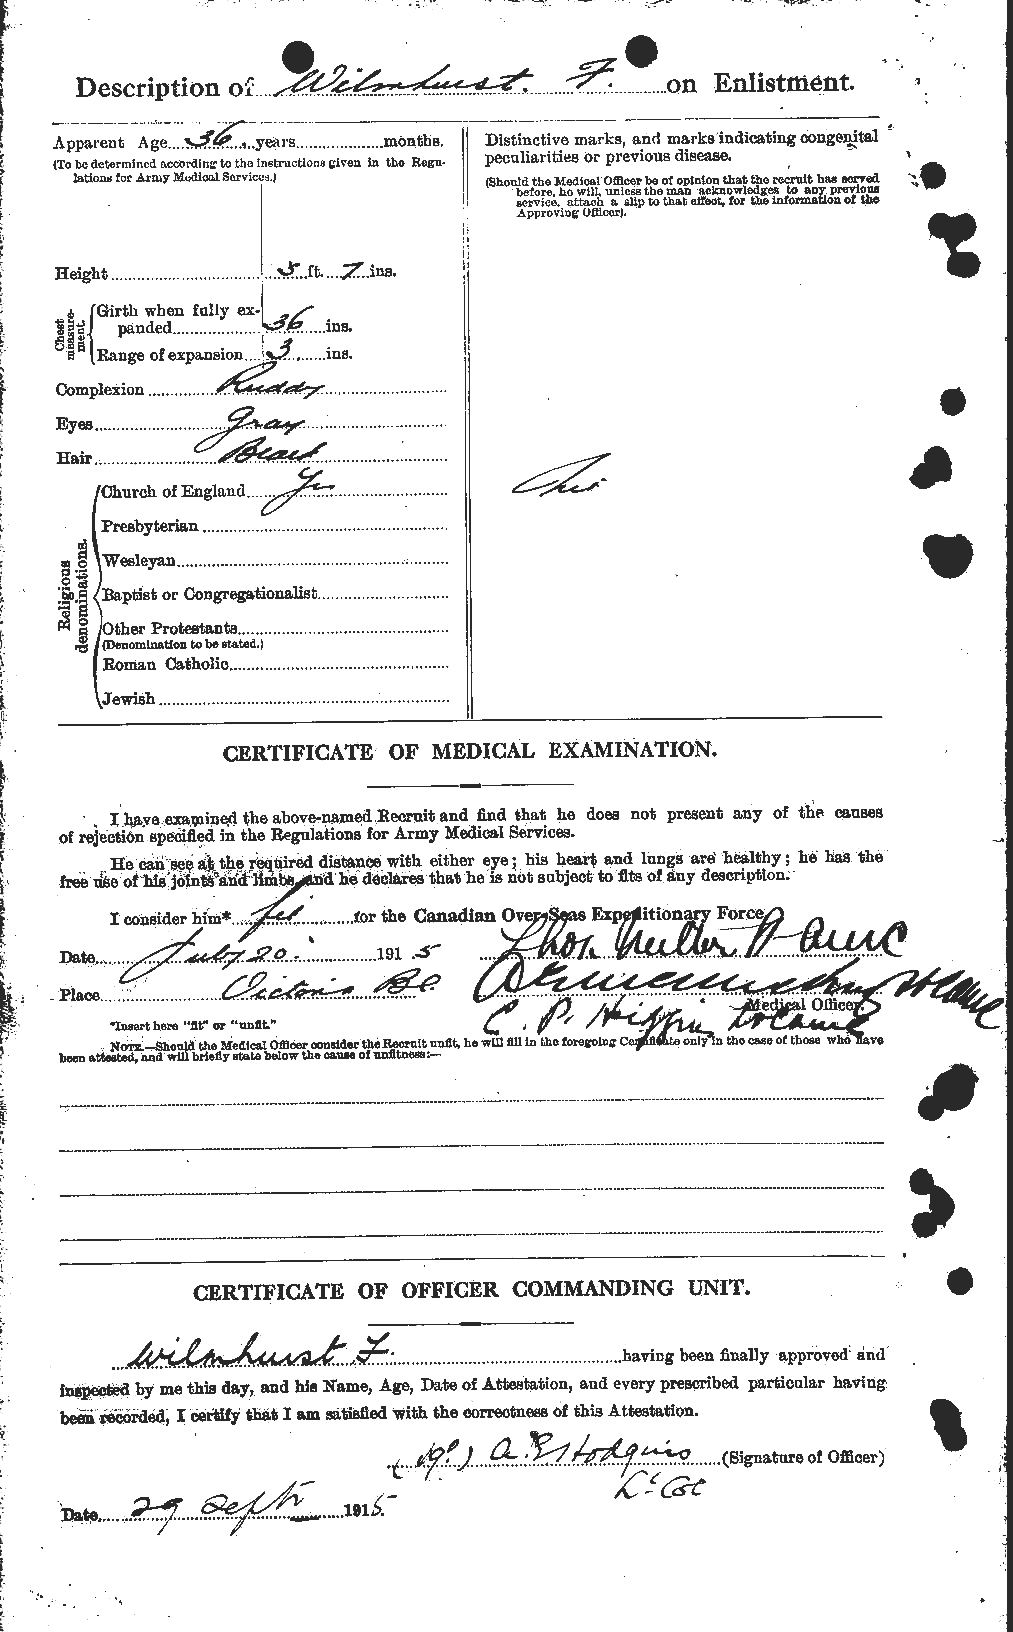 Personnel Records of the First World War - CEF 677091b